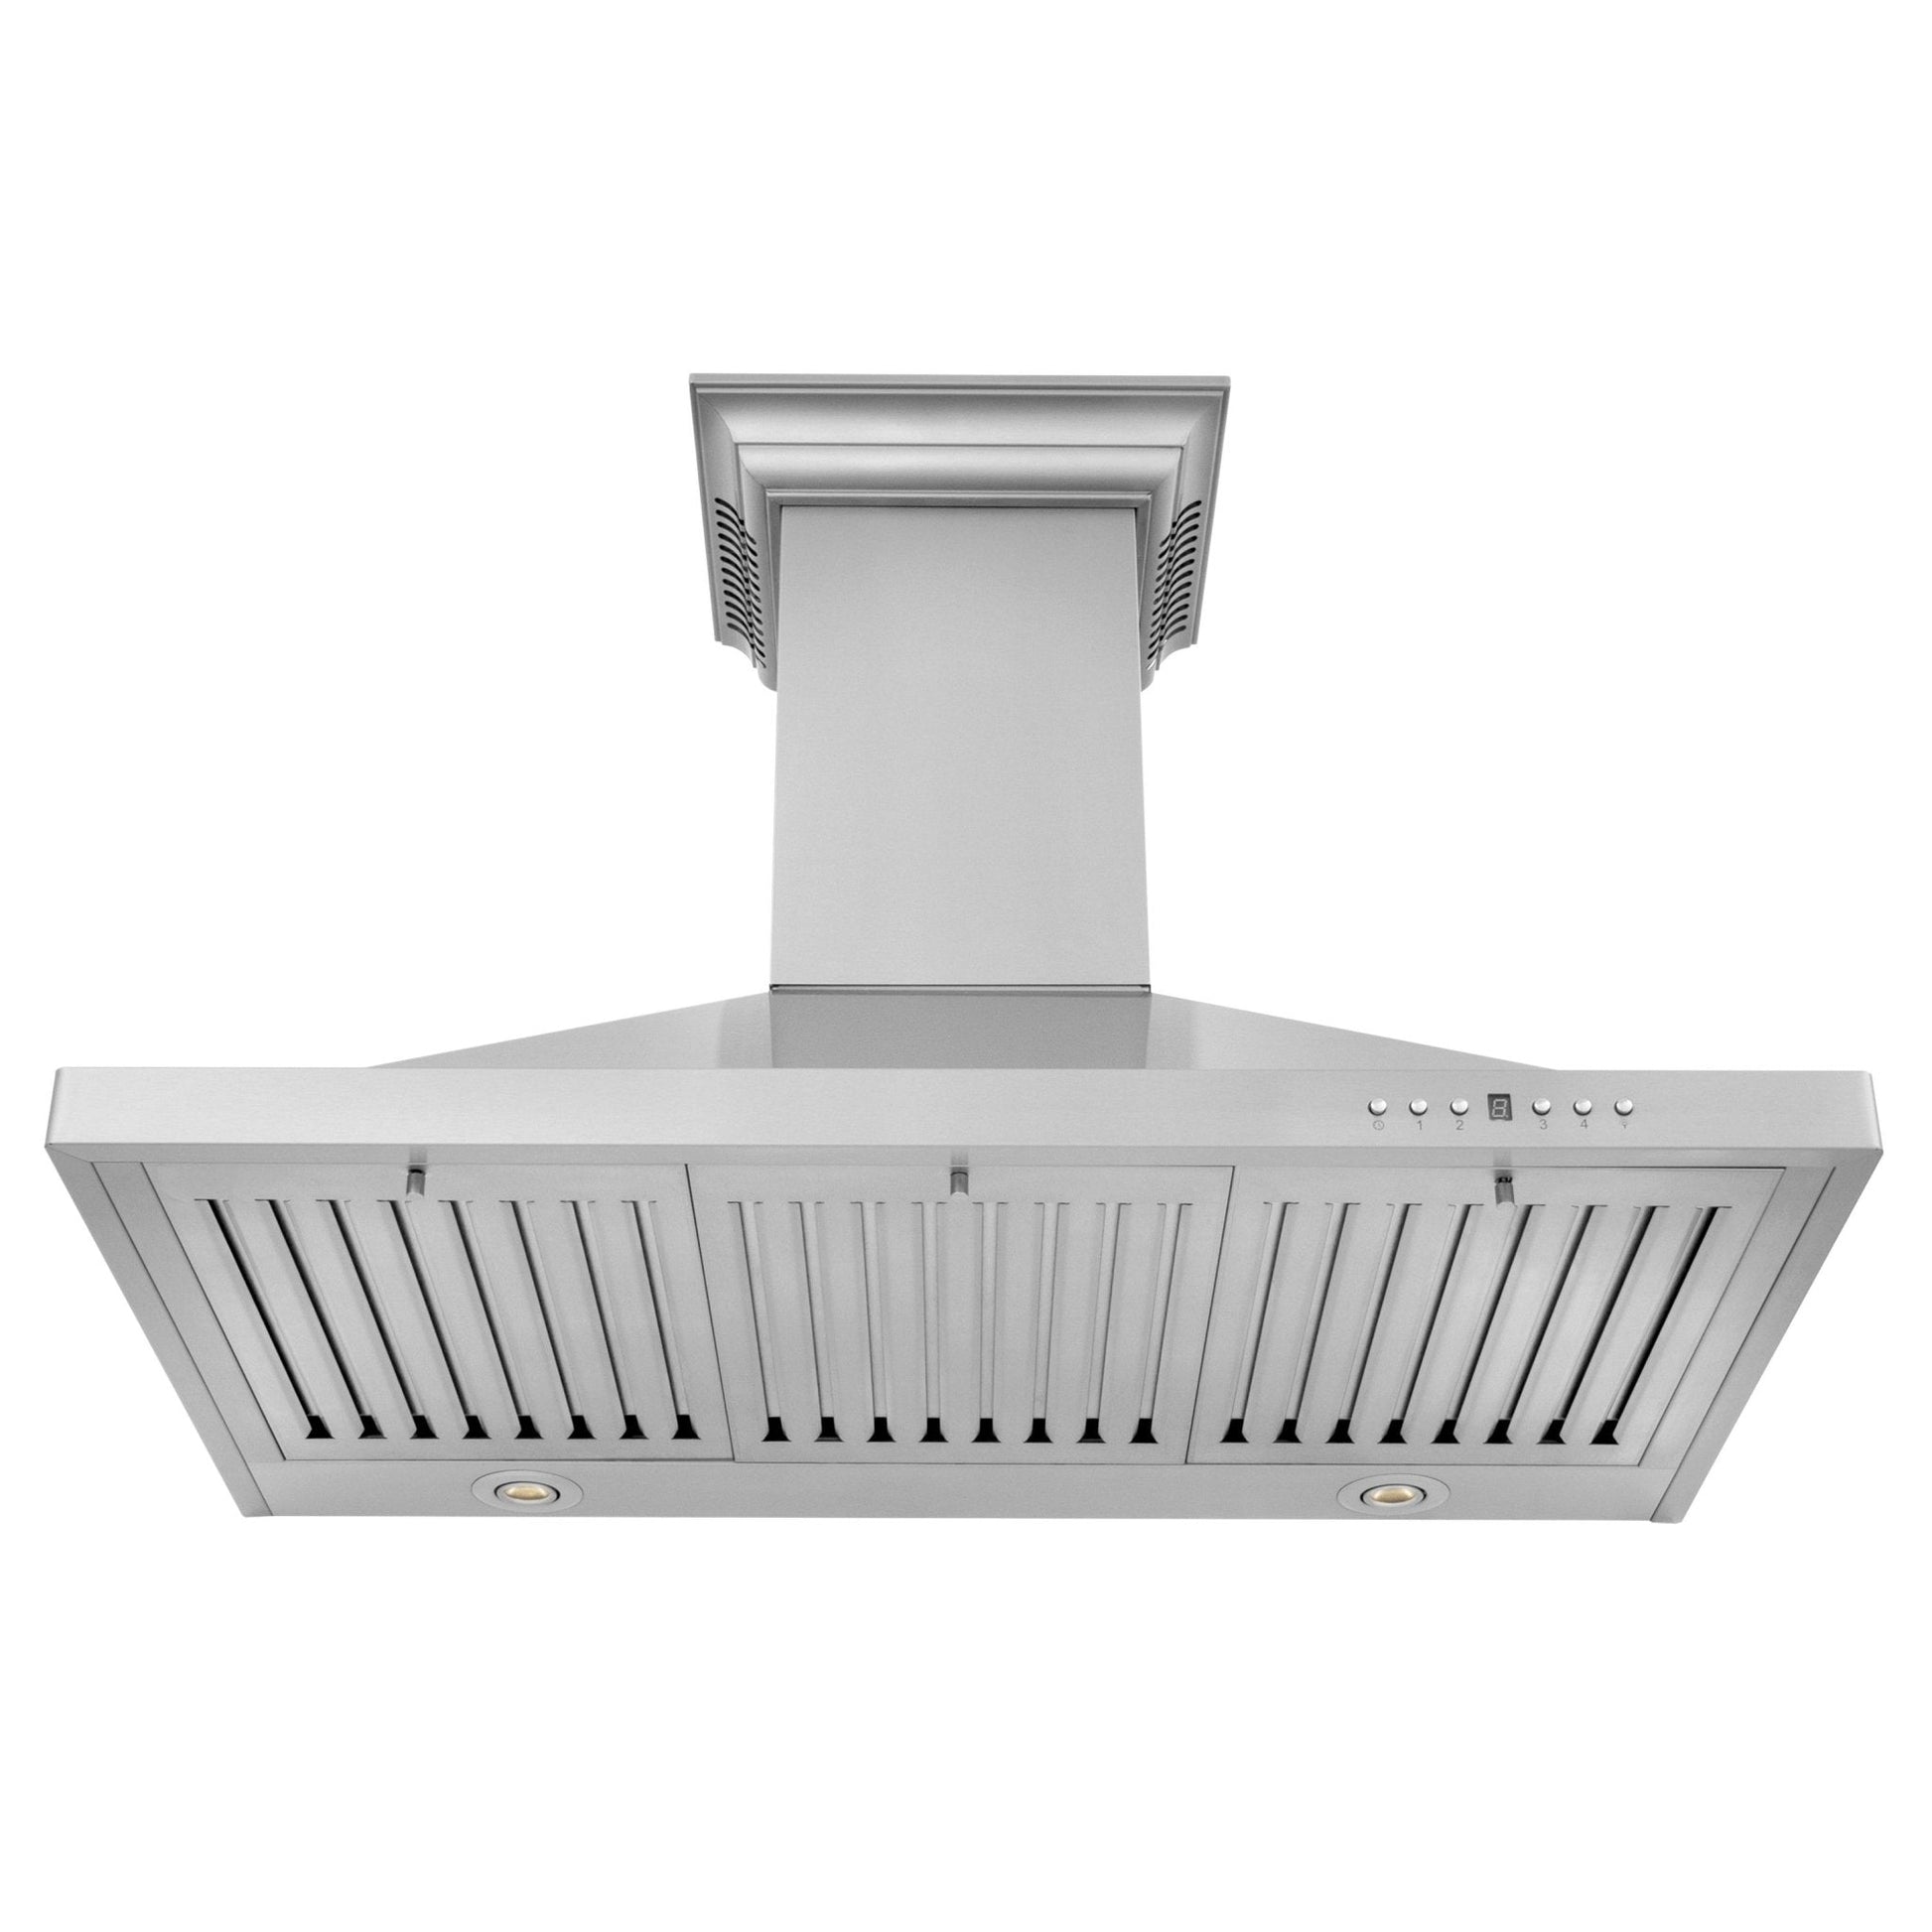 ZLINE CrownSound Ducted Vent Wall Mount Range Hood - Stainless Steel with Built in Bluetooth Speakers